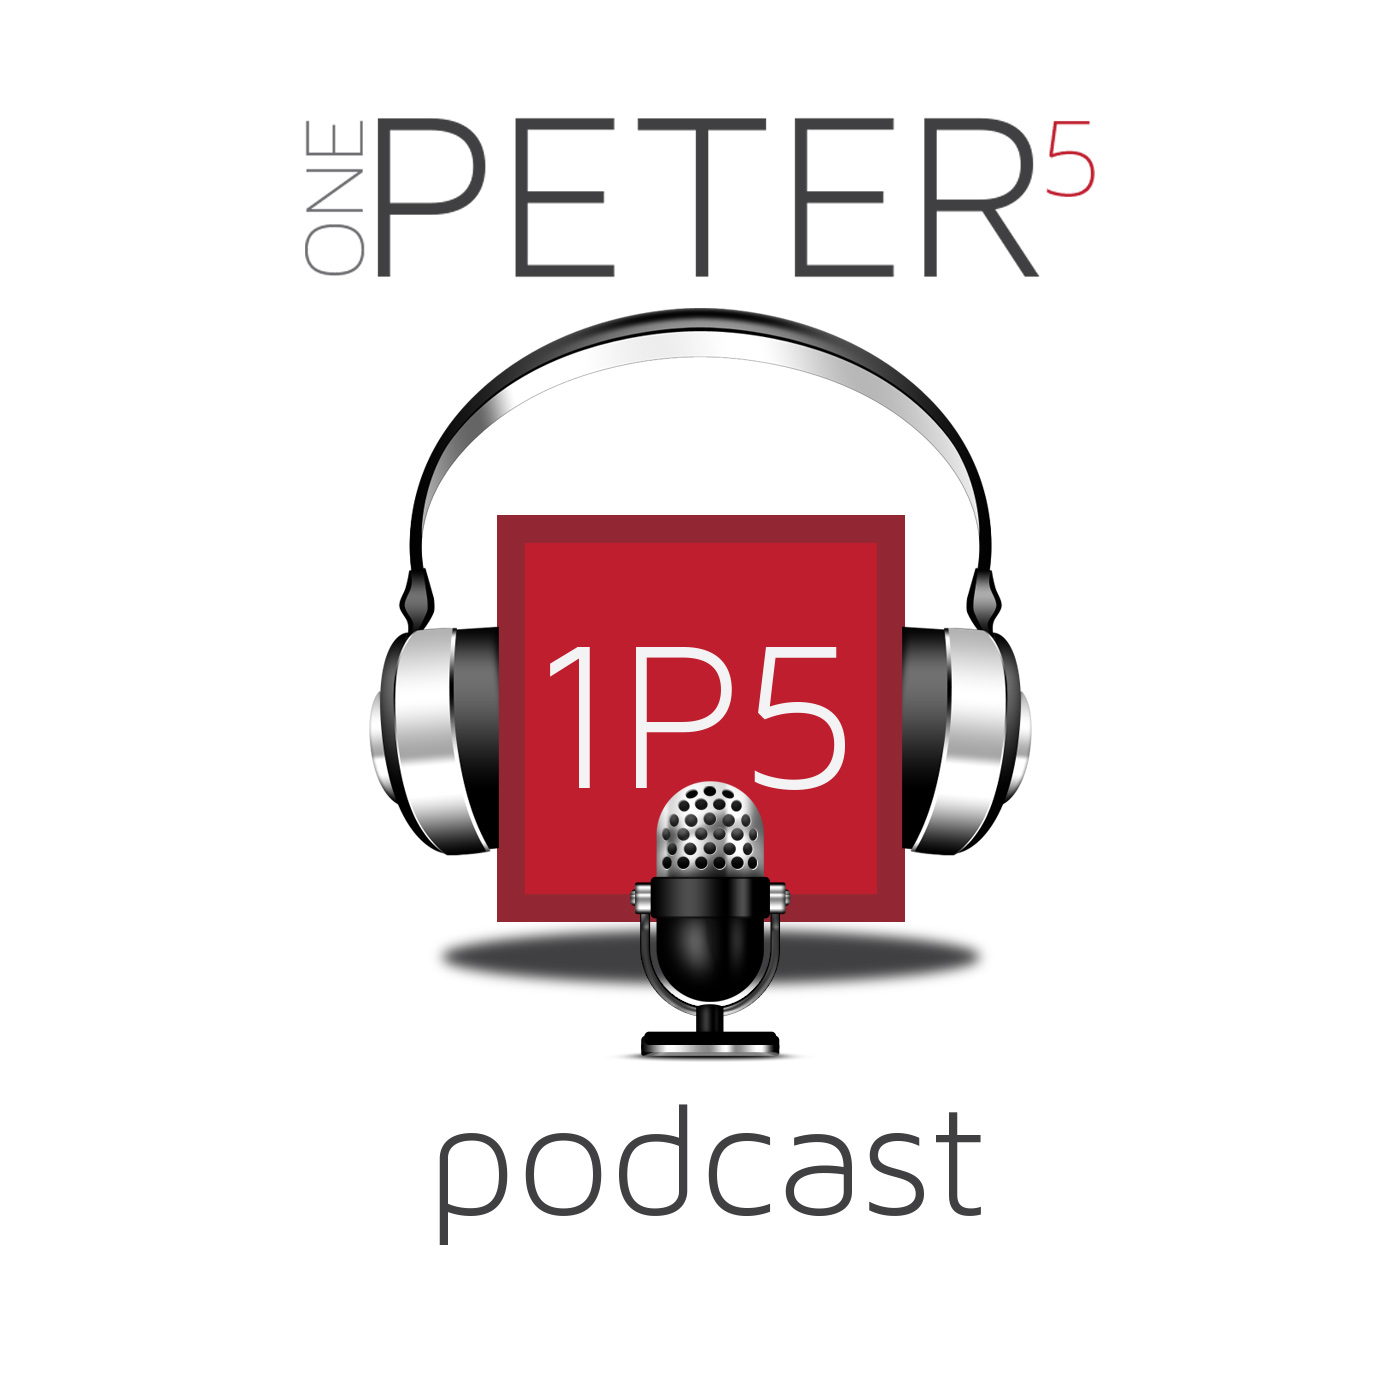 OnePeterFive Podcast